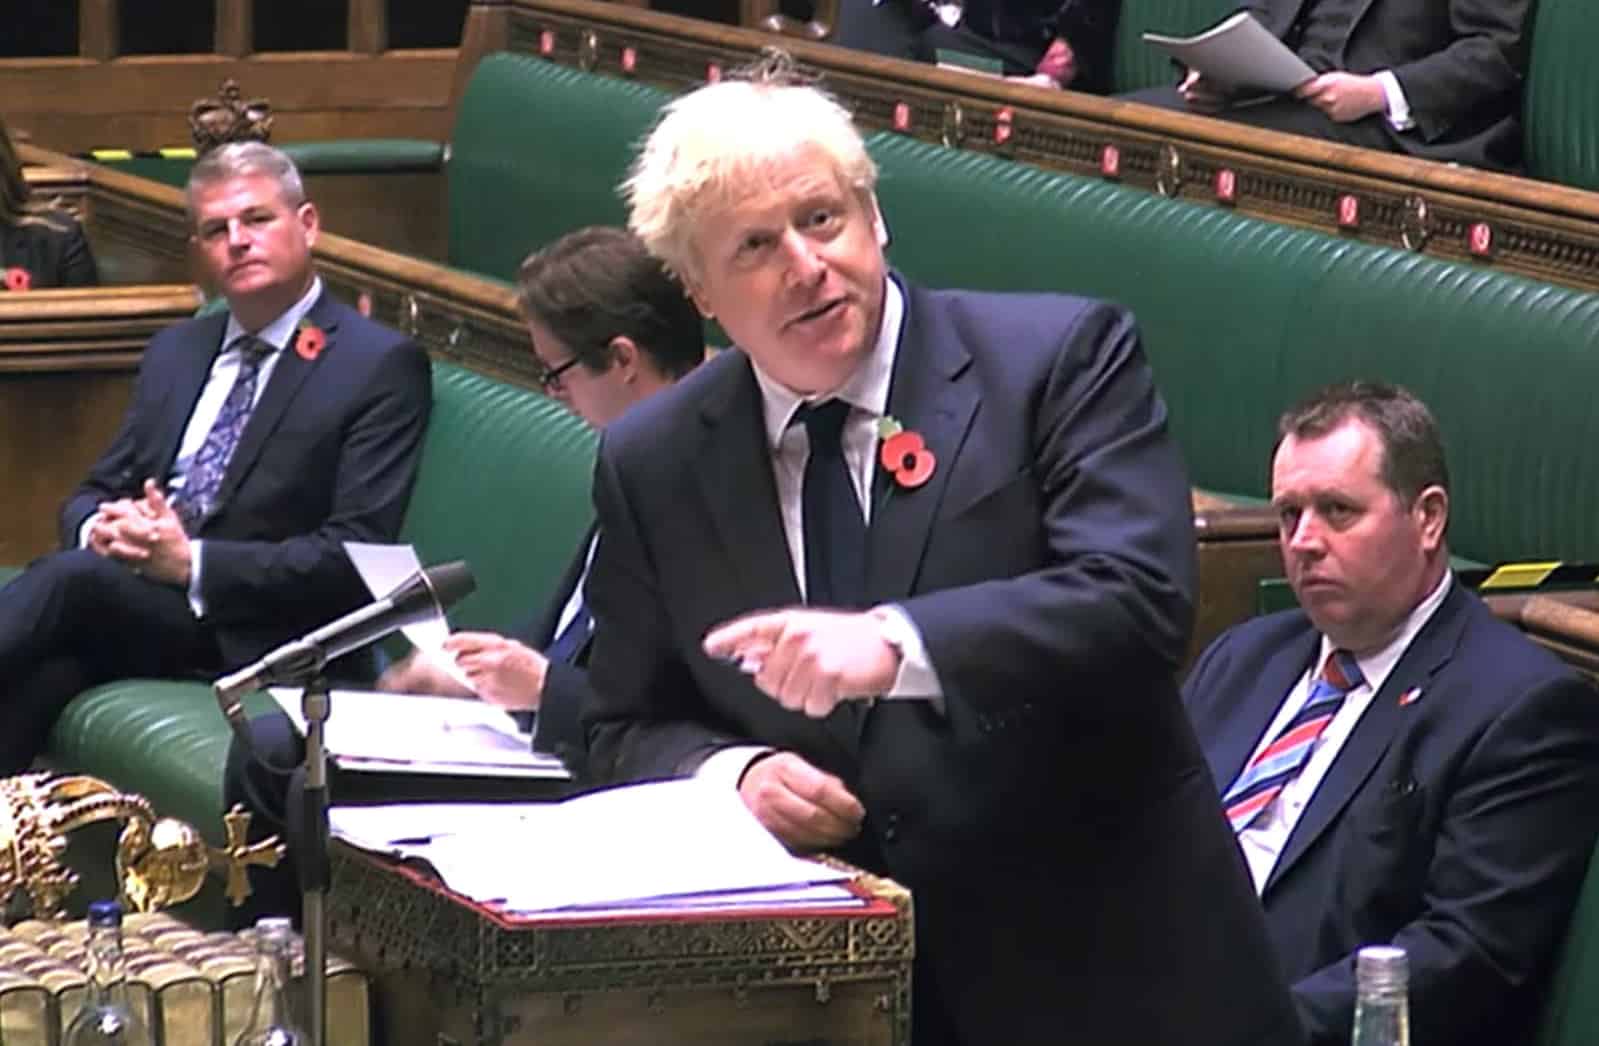 Johnson will be forced to resign if committee finds he misled Commons